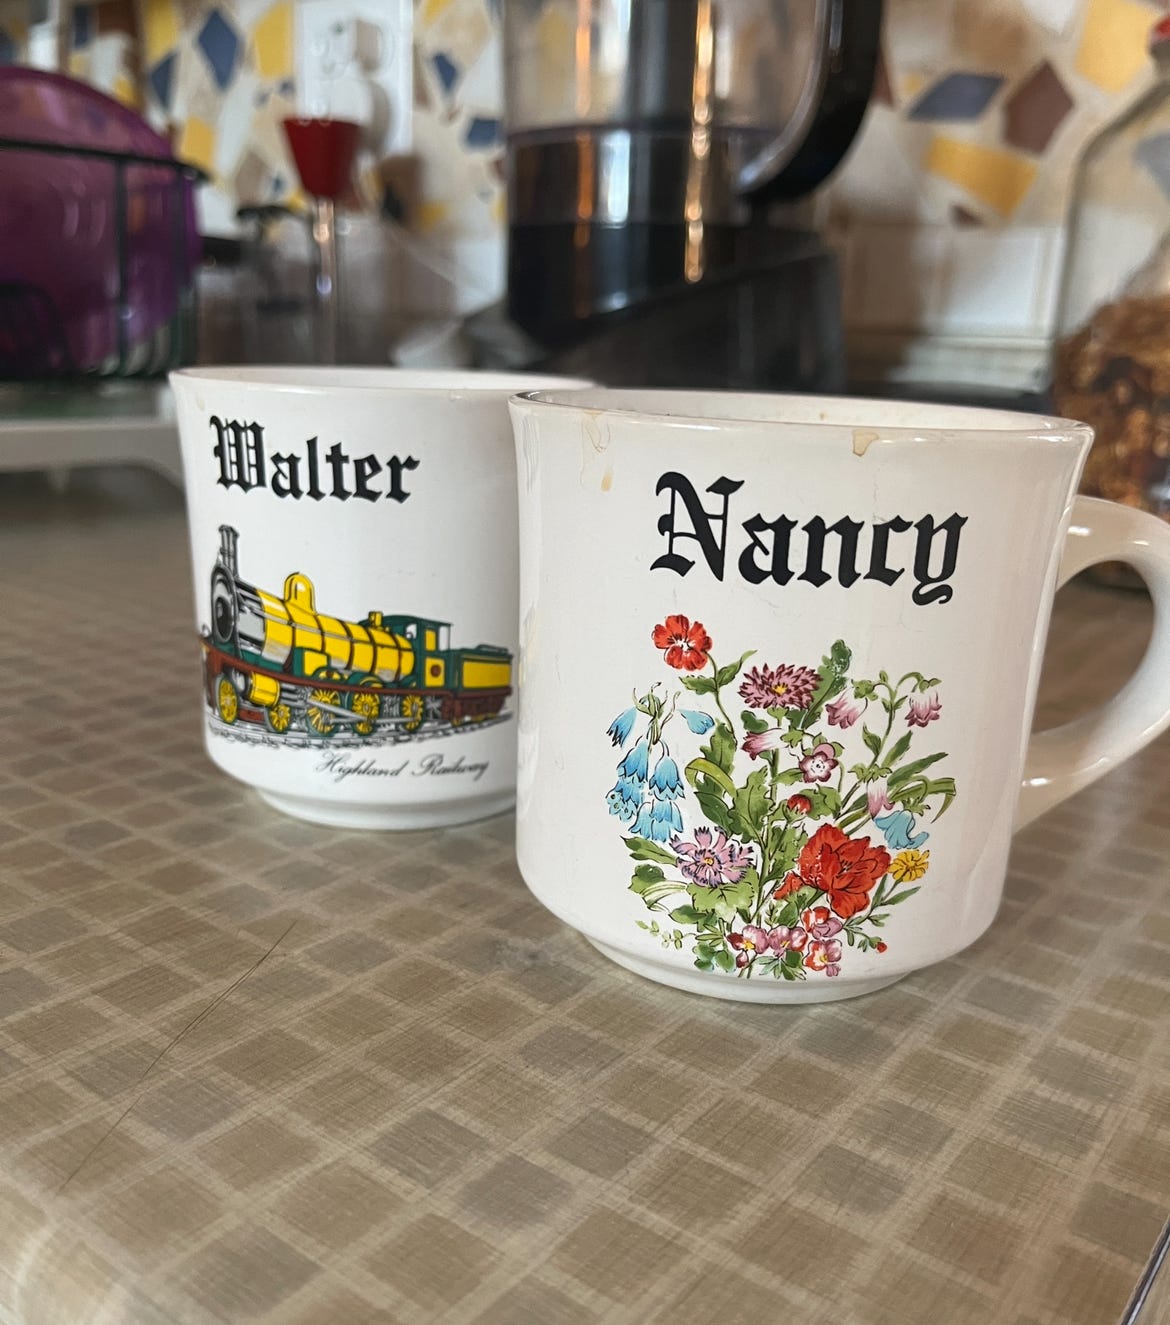 A pair of mugs. One has the name "Nancy" and has flowers on it. The other says "Walter" and has a train.